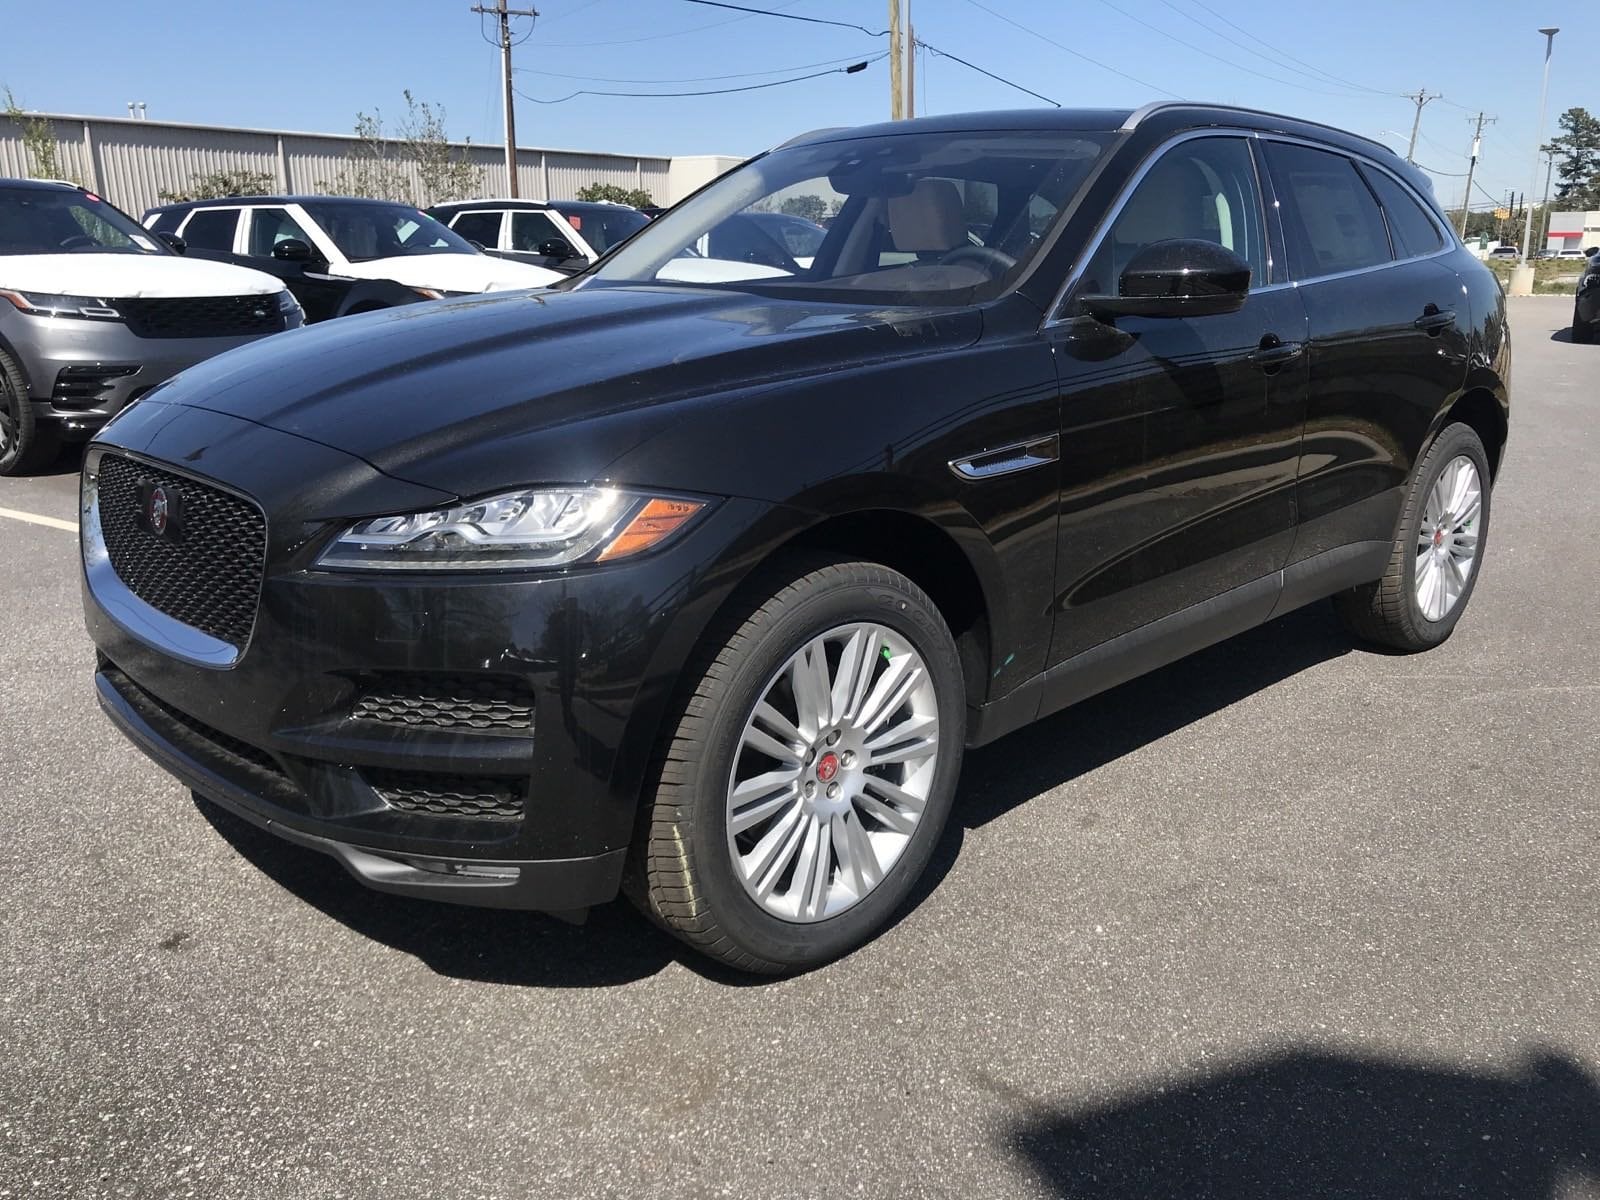 2019 F-PACE | Greenville SC Labor Day Sales Event